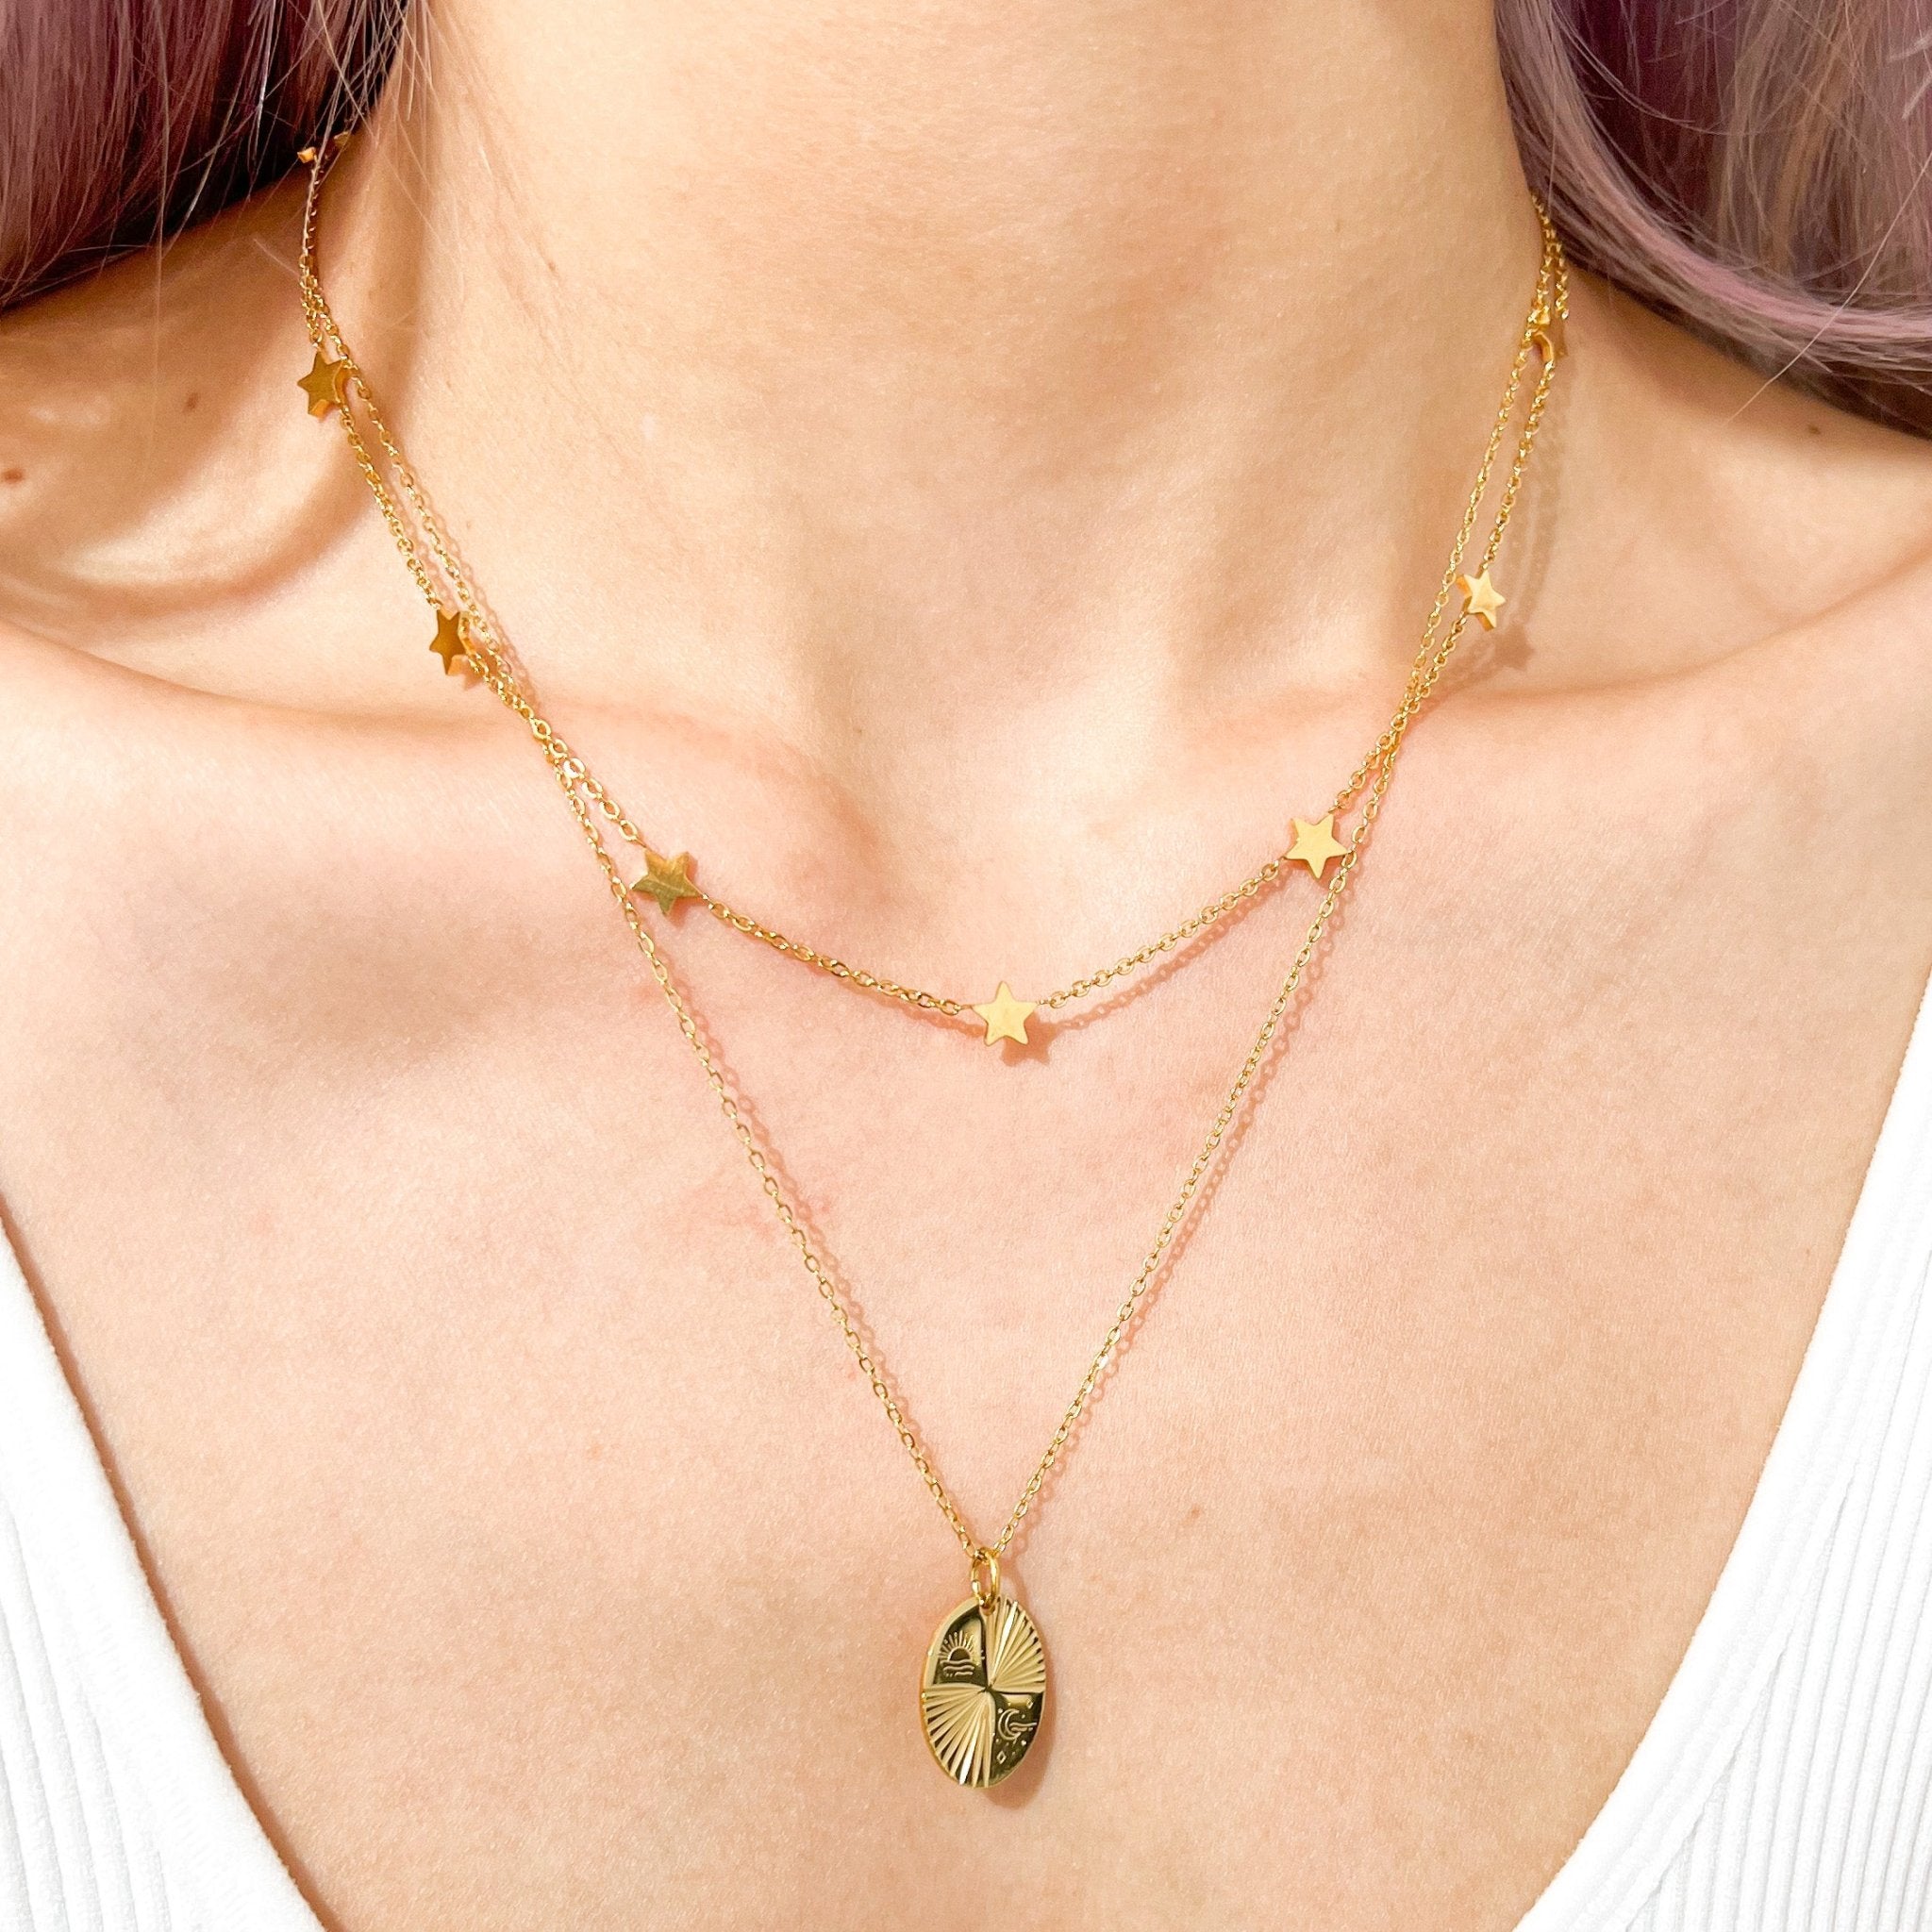 Celestial Necklace in Gold - Flaire & Co.